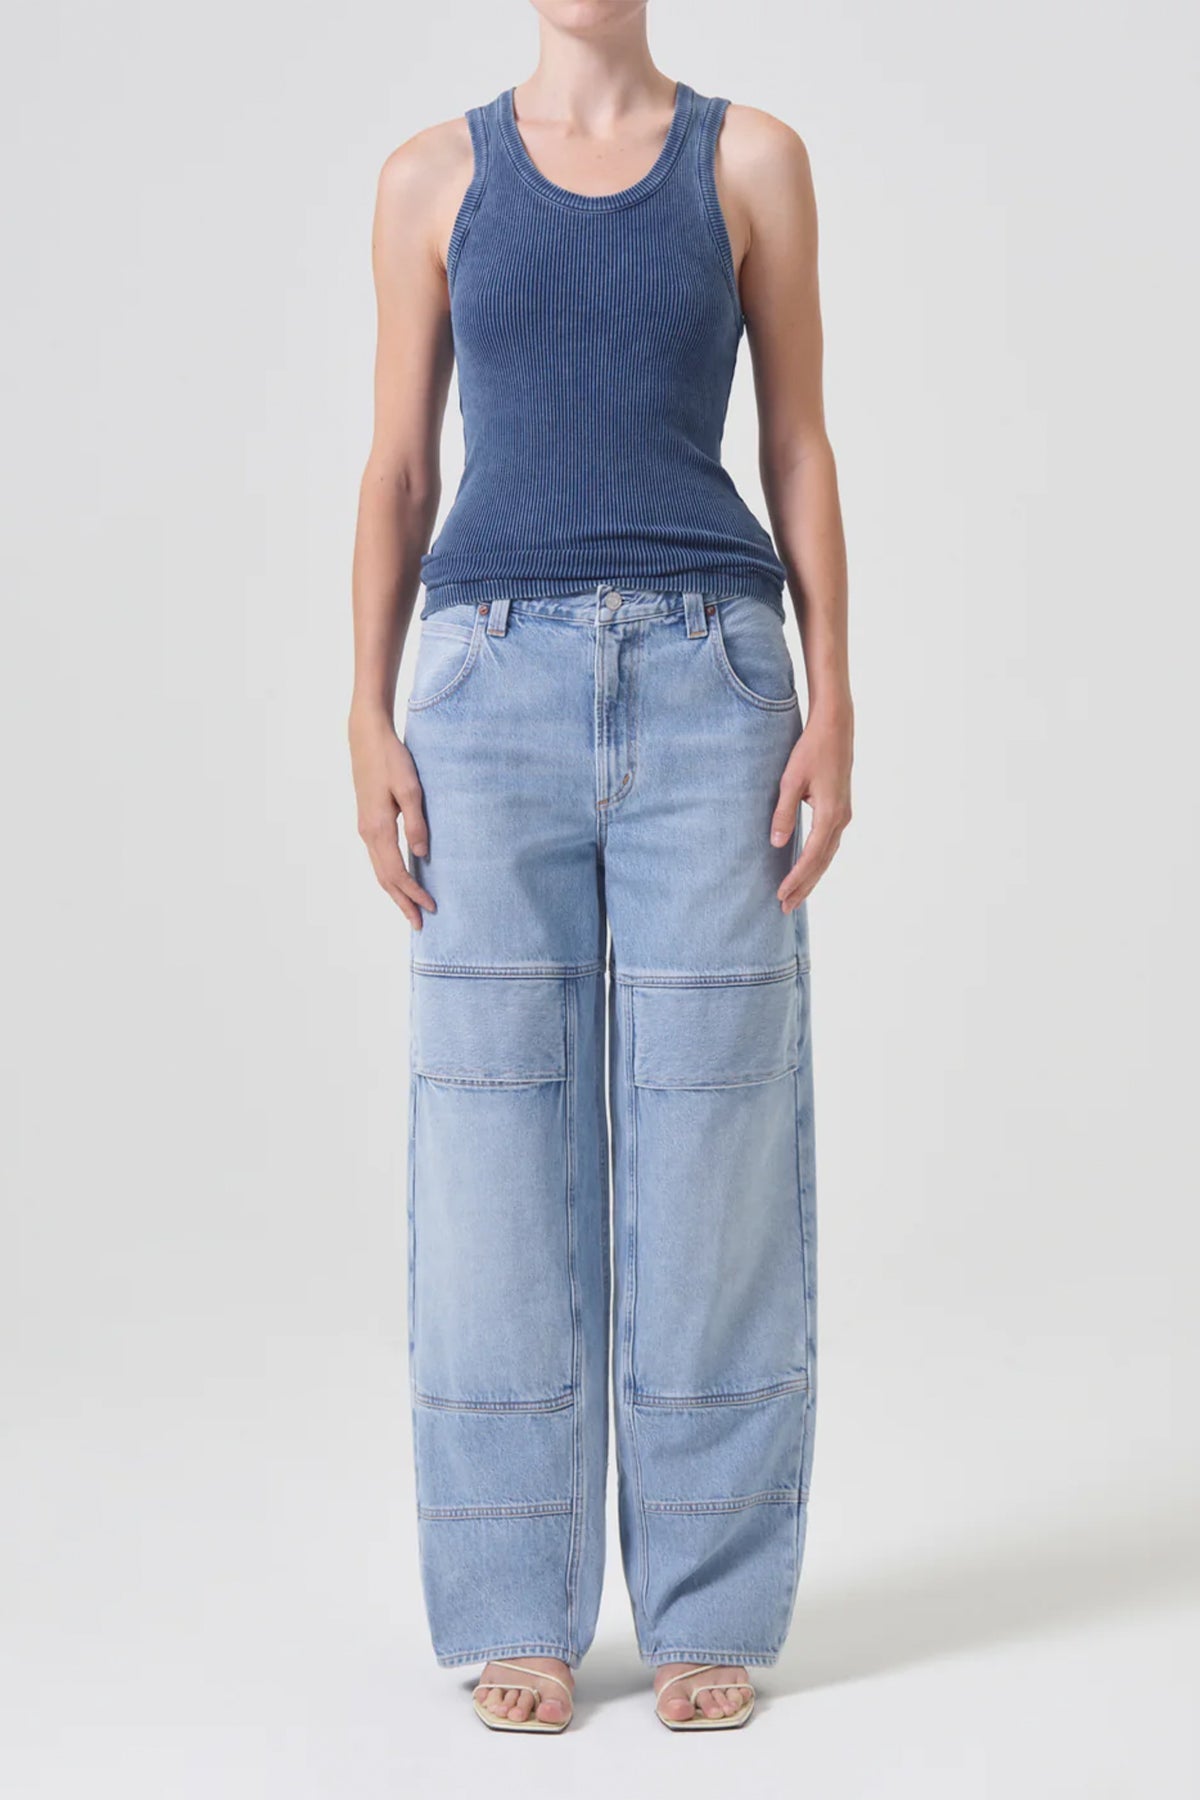 Tanis Utility Jean in Conflict - shop-olivia.com